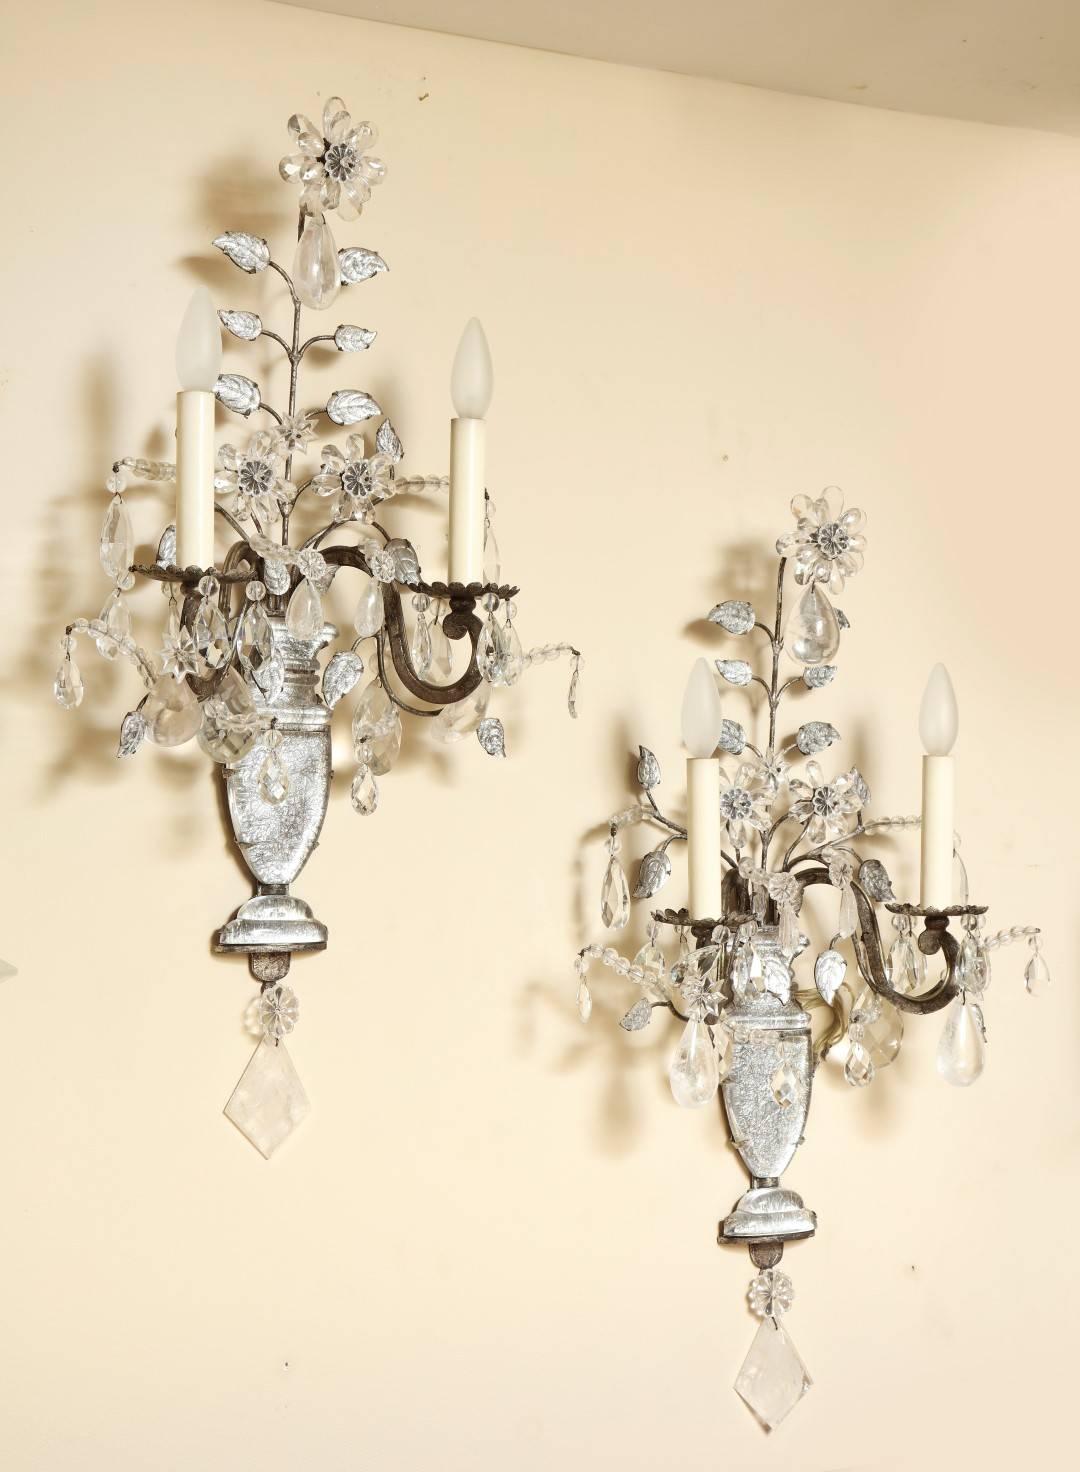 A pair of French Maison Bagues two-light wall sconces with silver gilt iron frames mounted with molded glass vase shaped elements backed with silver leaf. Each backplate issuing branches with individual crystal leaves and flowers formed of crystal